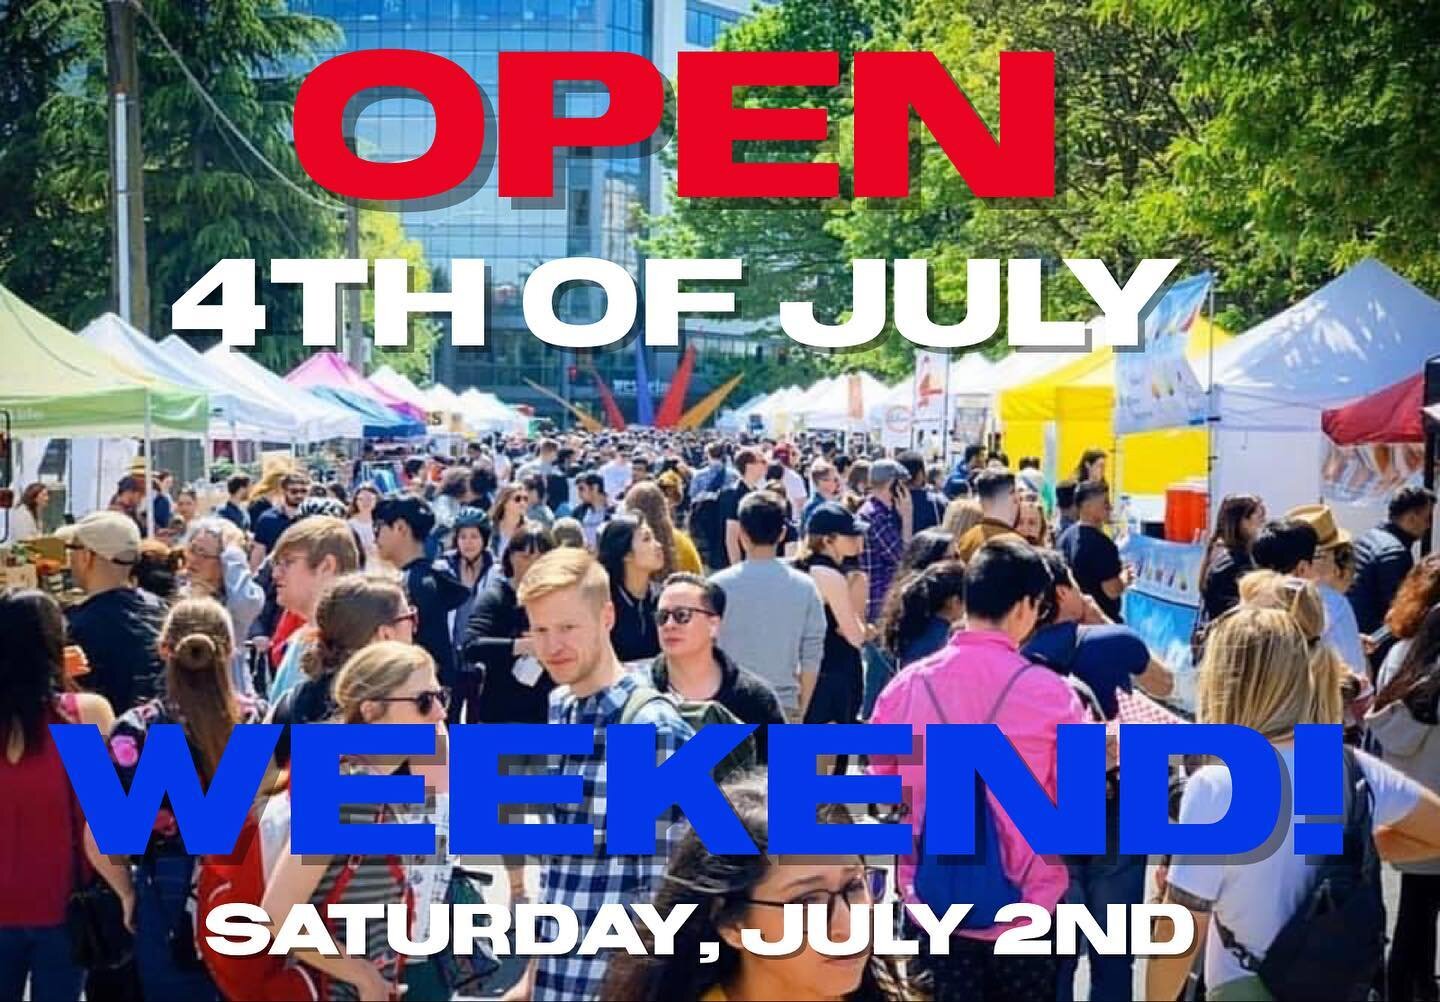 @southlakeunion  is open and we&rsquo;re hanging curbside for Seattle&rsquo;s favorite Saturday market this weekend from 11-4pm by Denny Park! Come say hi!